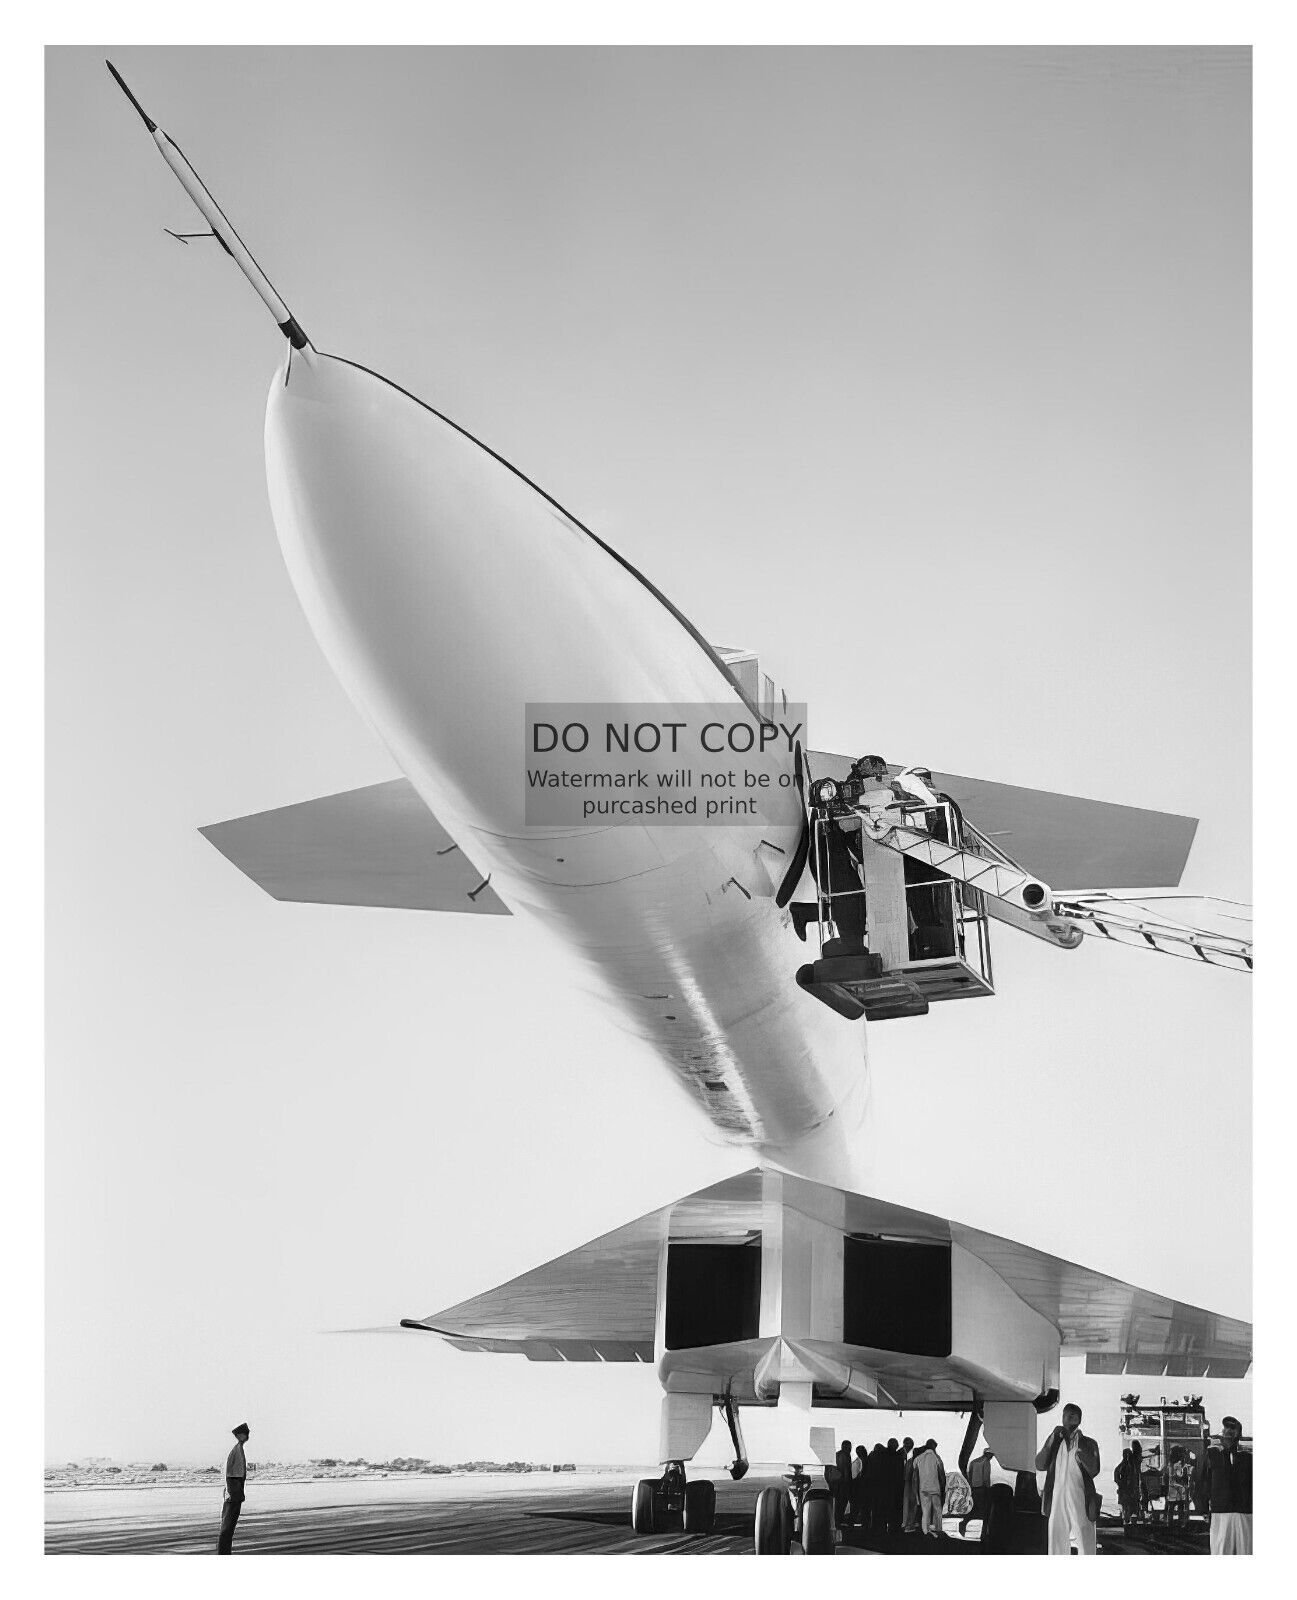 NOSE OF THE XB-70 VALKYRIE BOMBER PLANE 8X10 B&W PHOTO